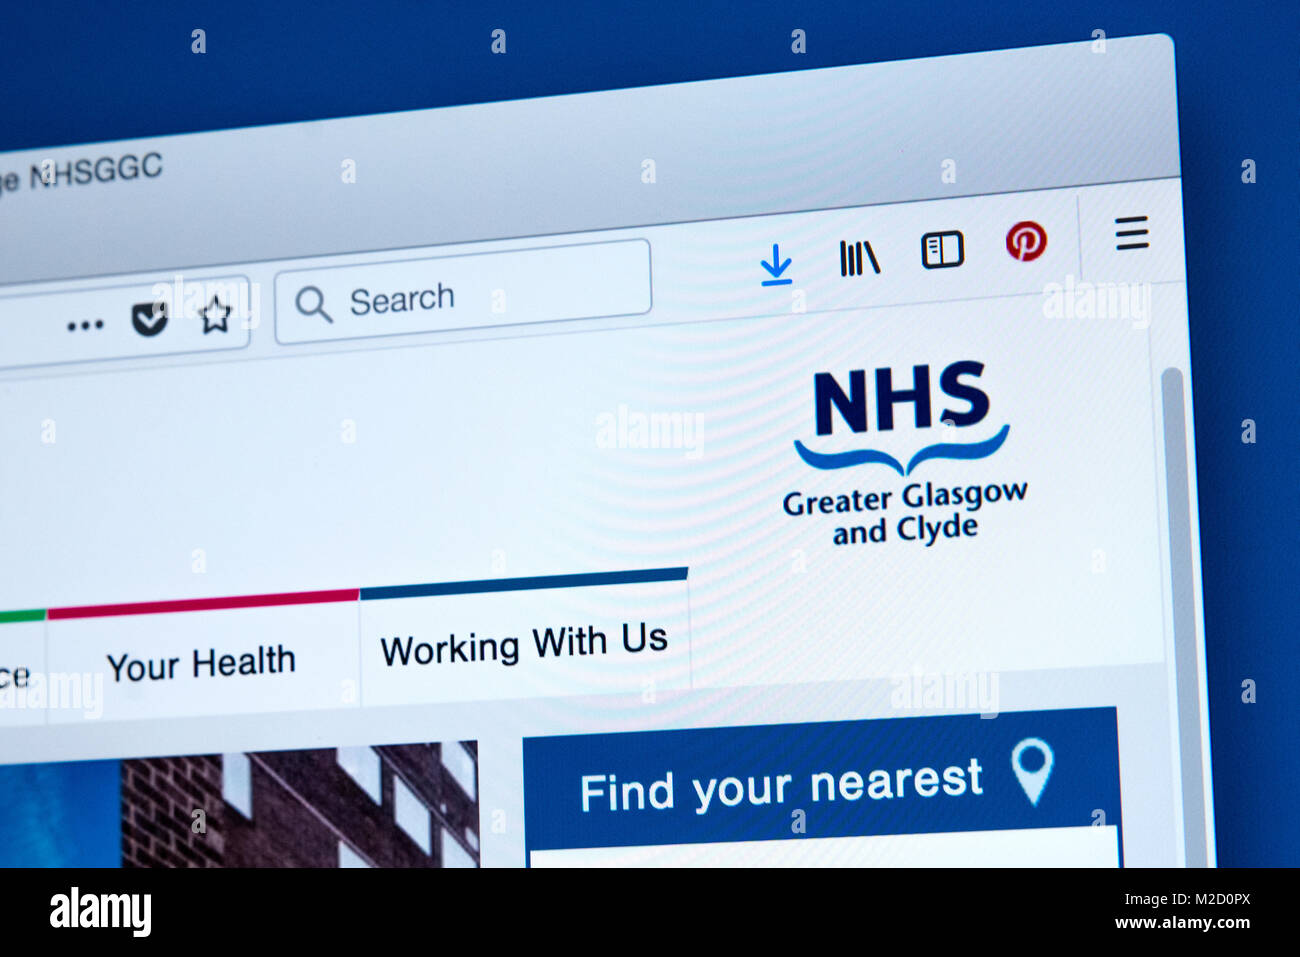 LONDON, UK - JANUARY 15TH 2018: The homepage of the official website for the NHS Greater Glasgow and Clyde, on 15th January 2018. Stock Photo